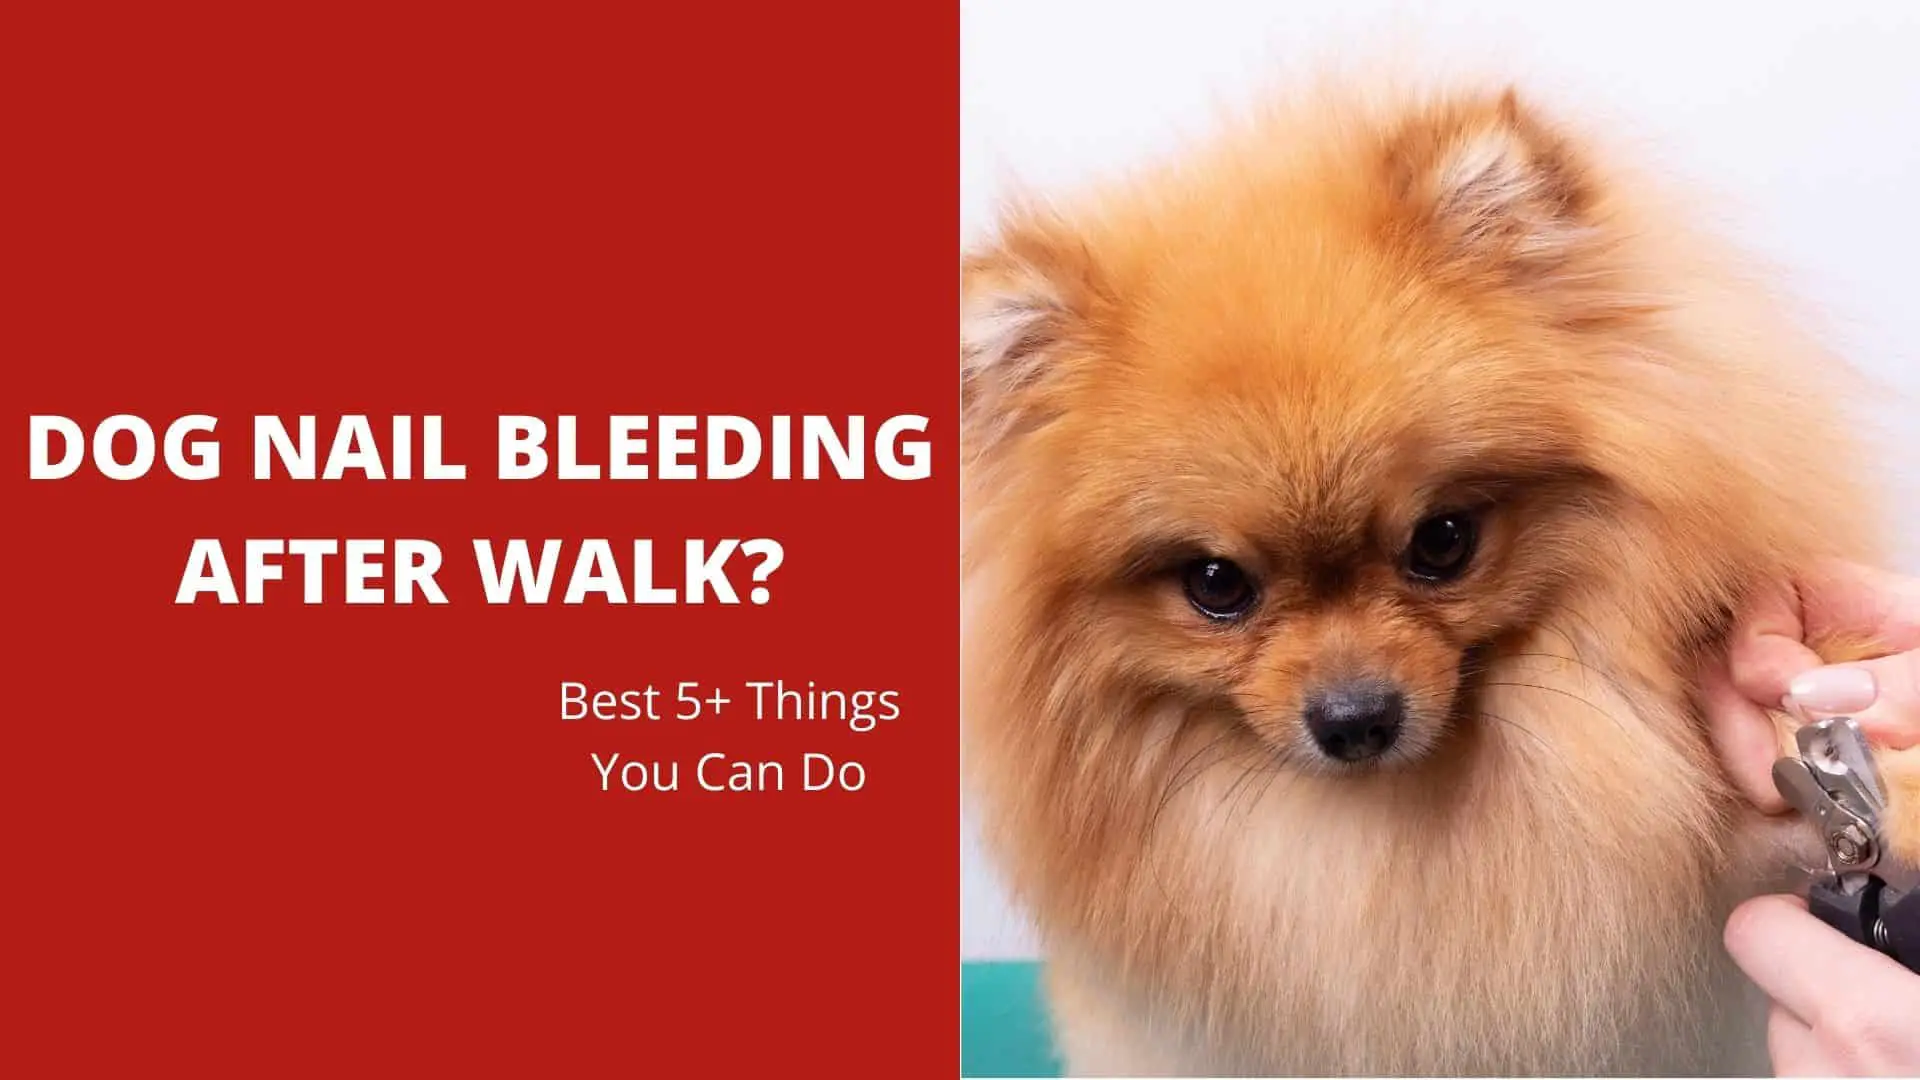 Dog Nail Bleeding After Walk? Best 5+ Things You Can Do